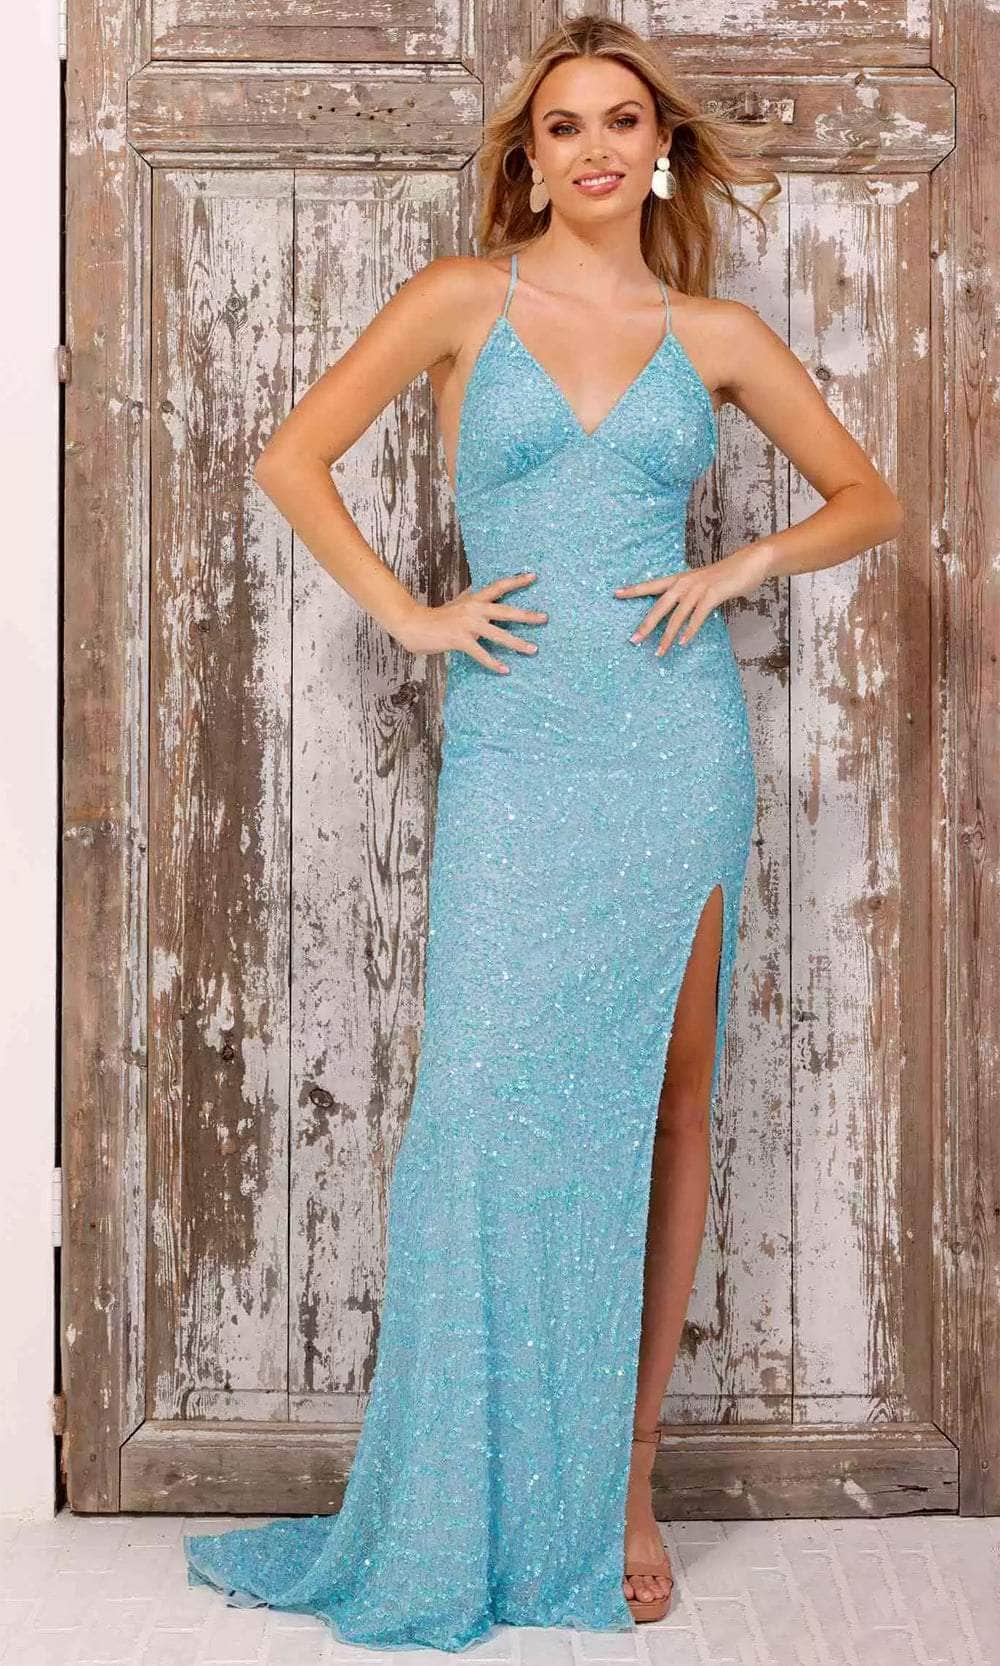 Image of Aleta Couture 882 - Sleeveless Open Back Evening Gown